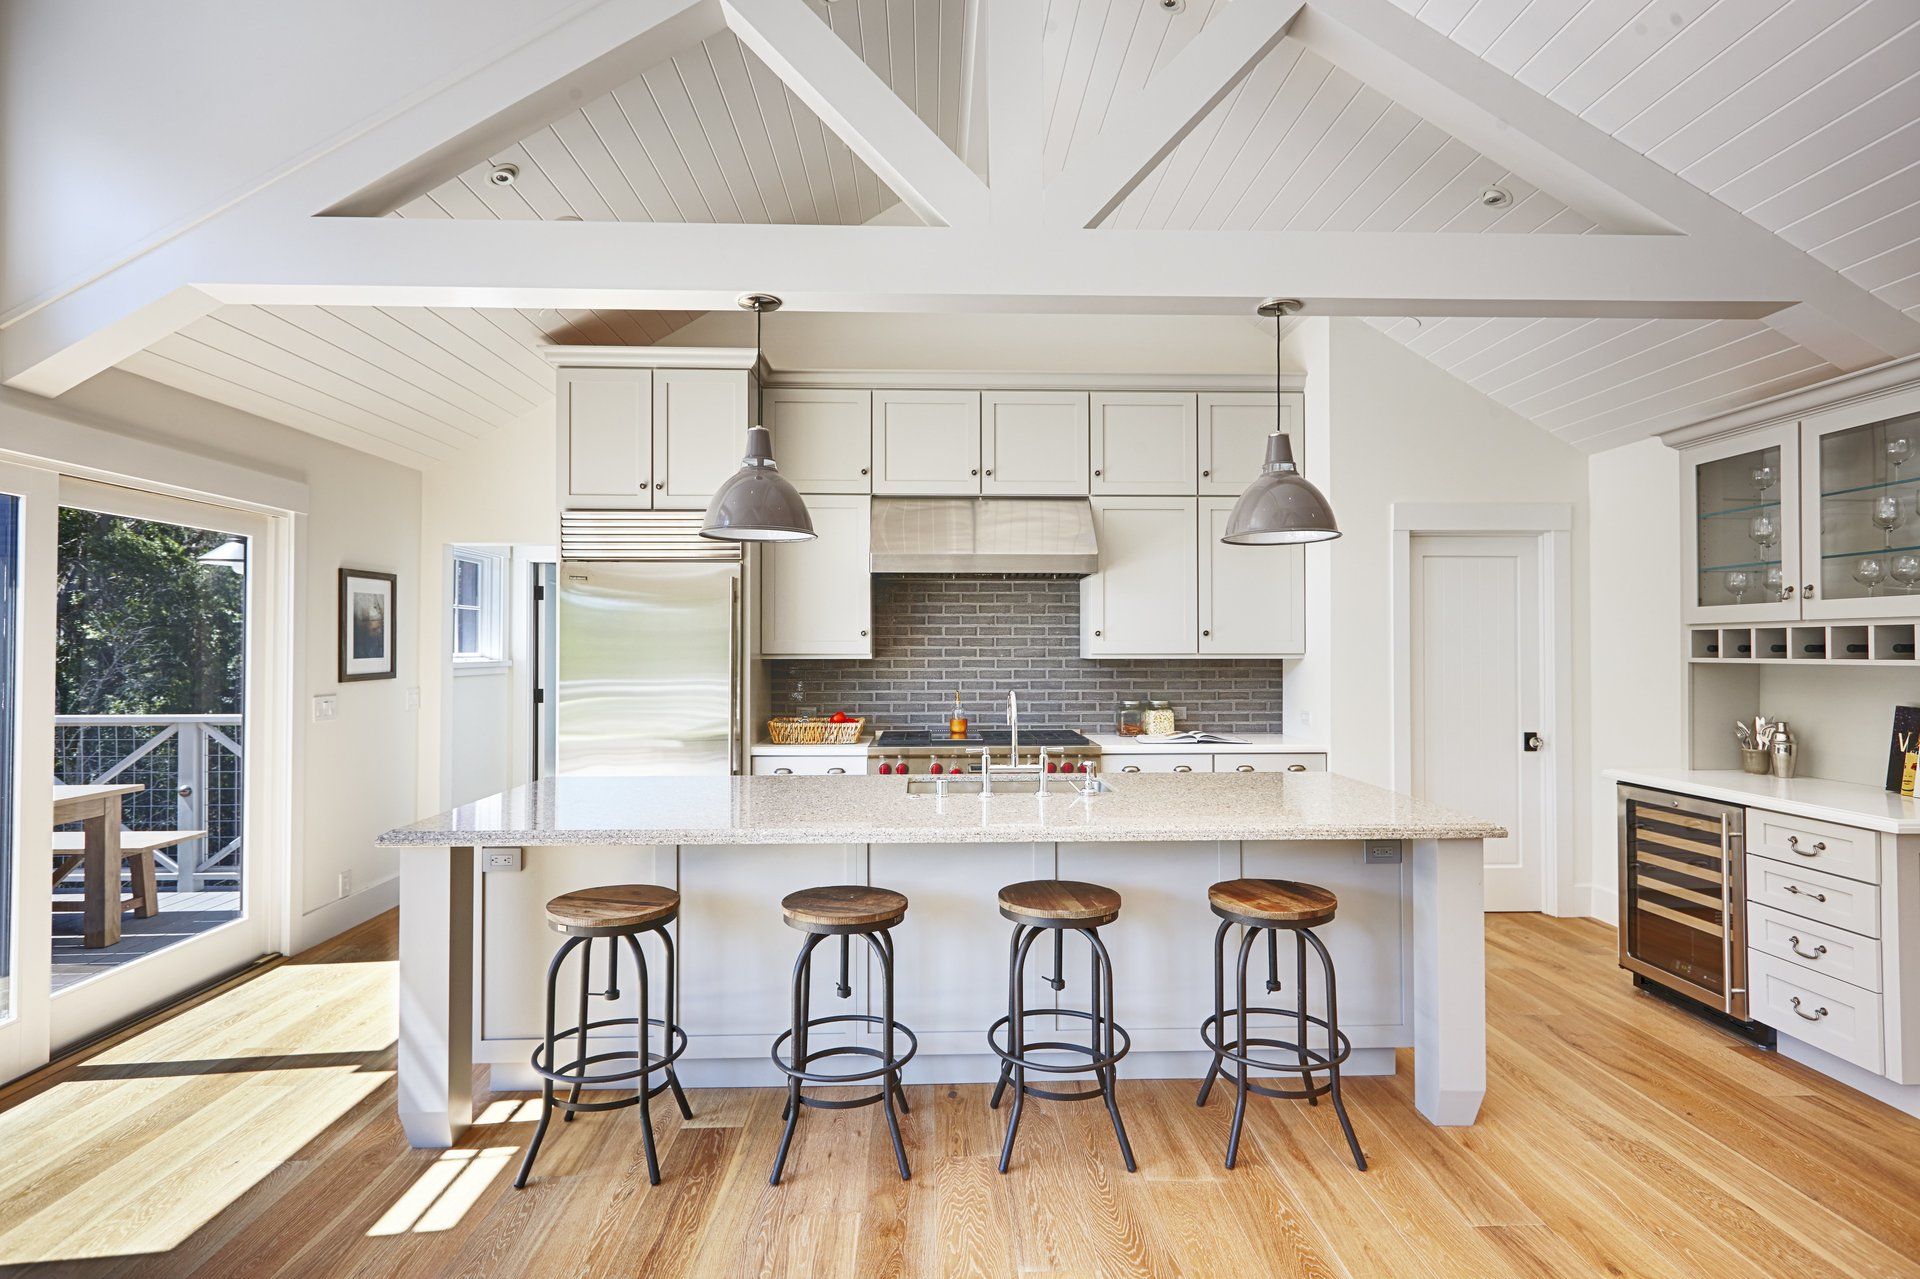 Kitchen living in a vintage inspired modern farmhouse